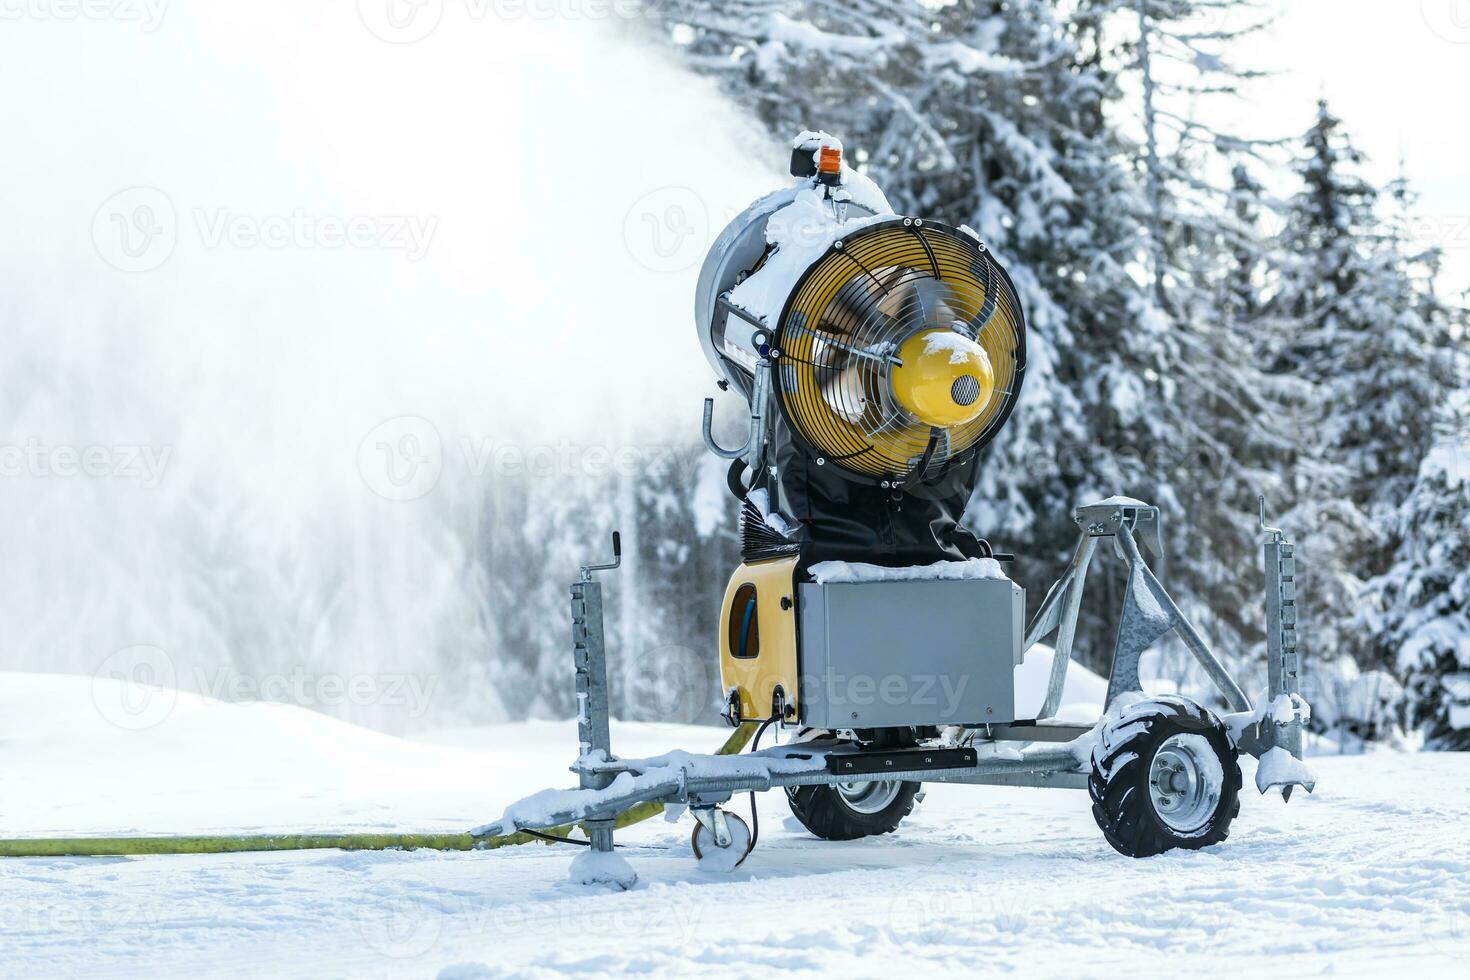 Snow cannon gun or machine sprays water and snowes a ski or cross-country track photo